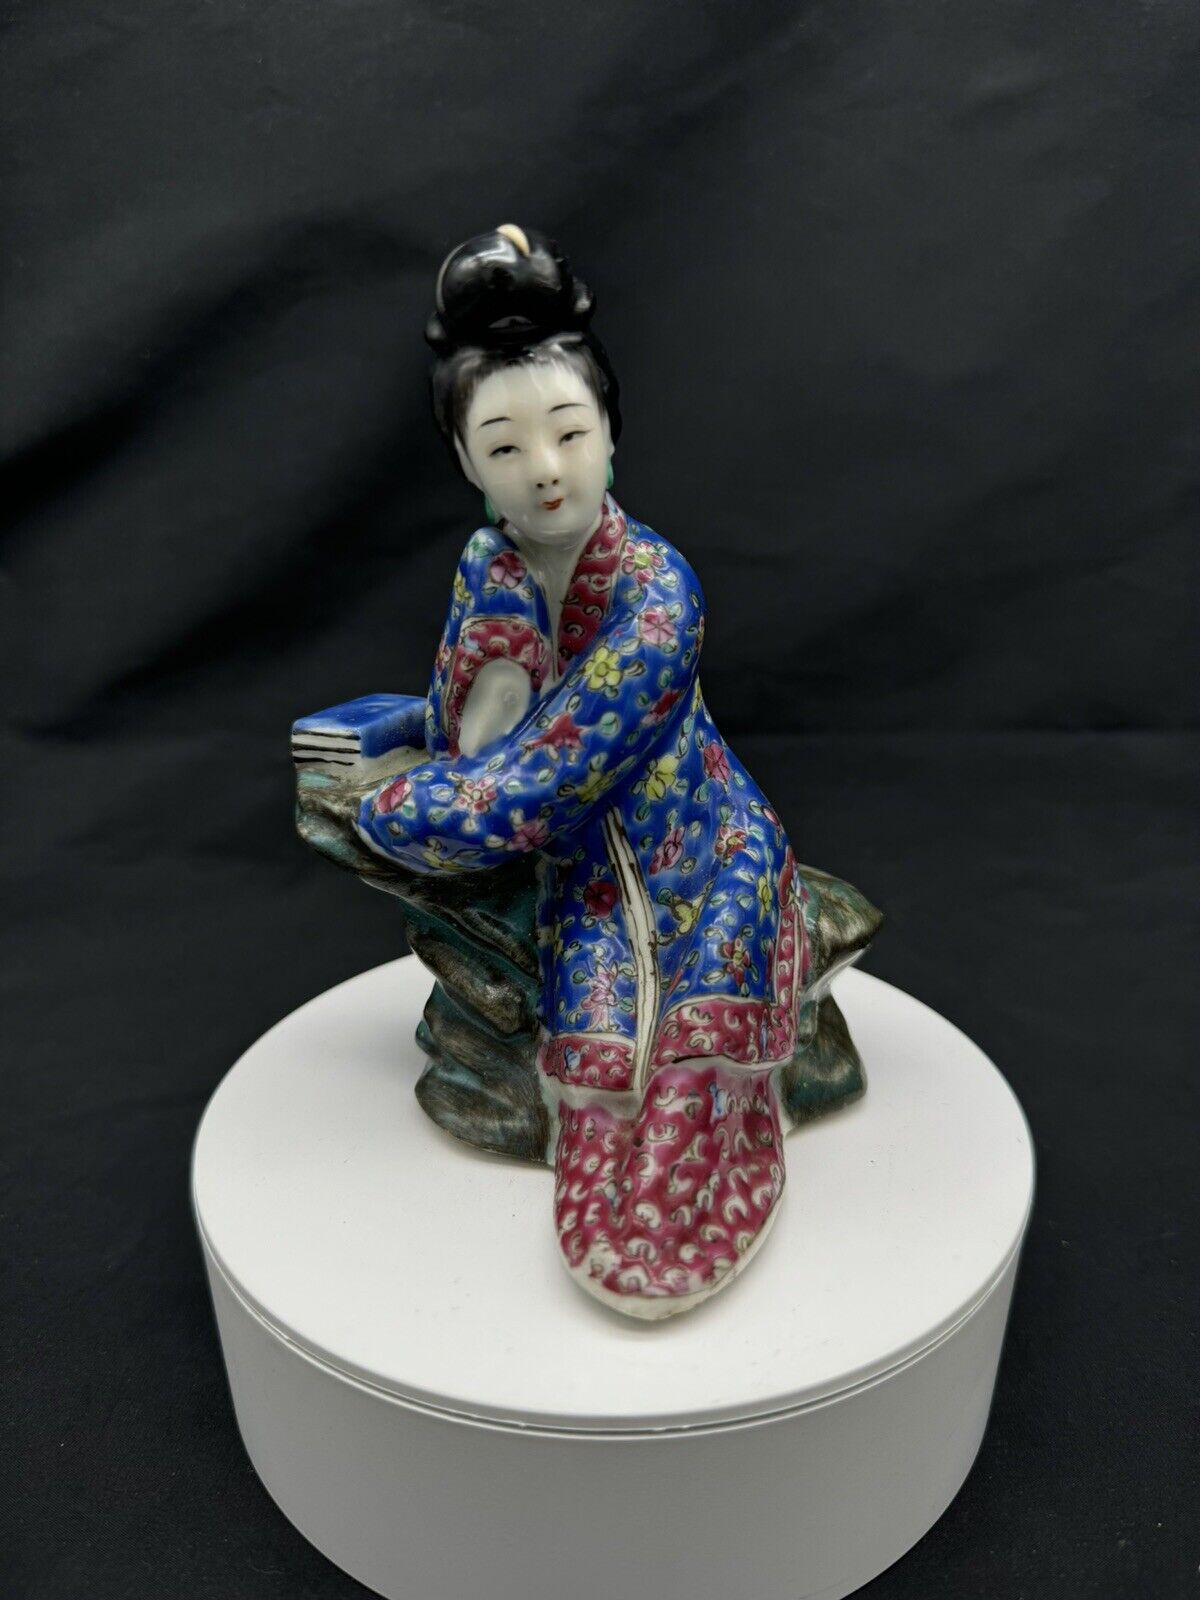 Antique Chinese Famille Rose Porcelain Figurine, Qing Dynasty